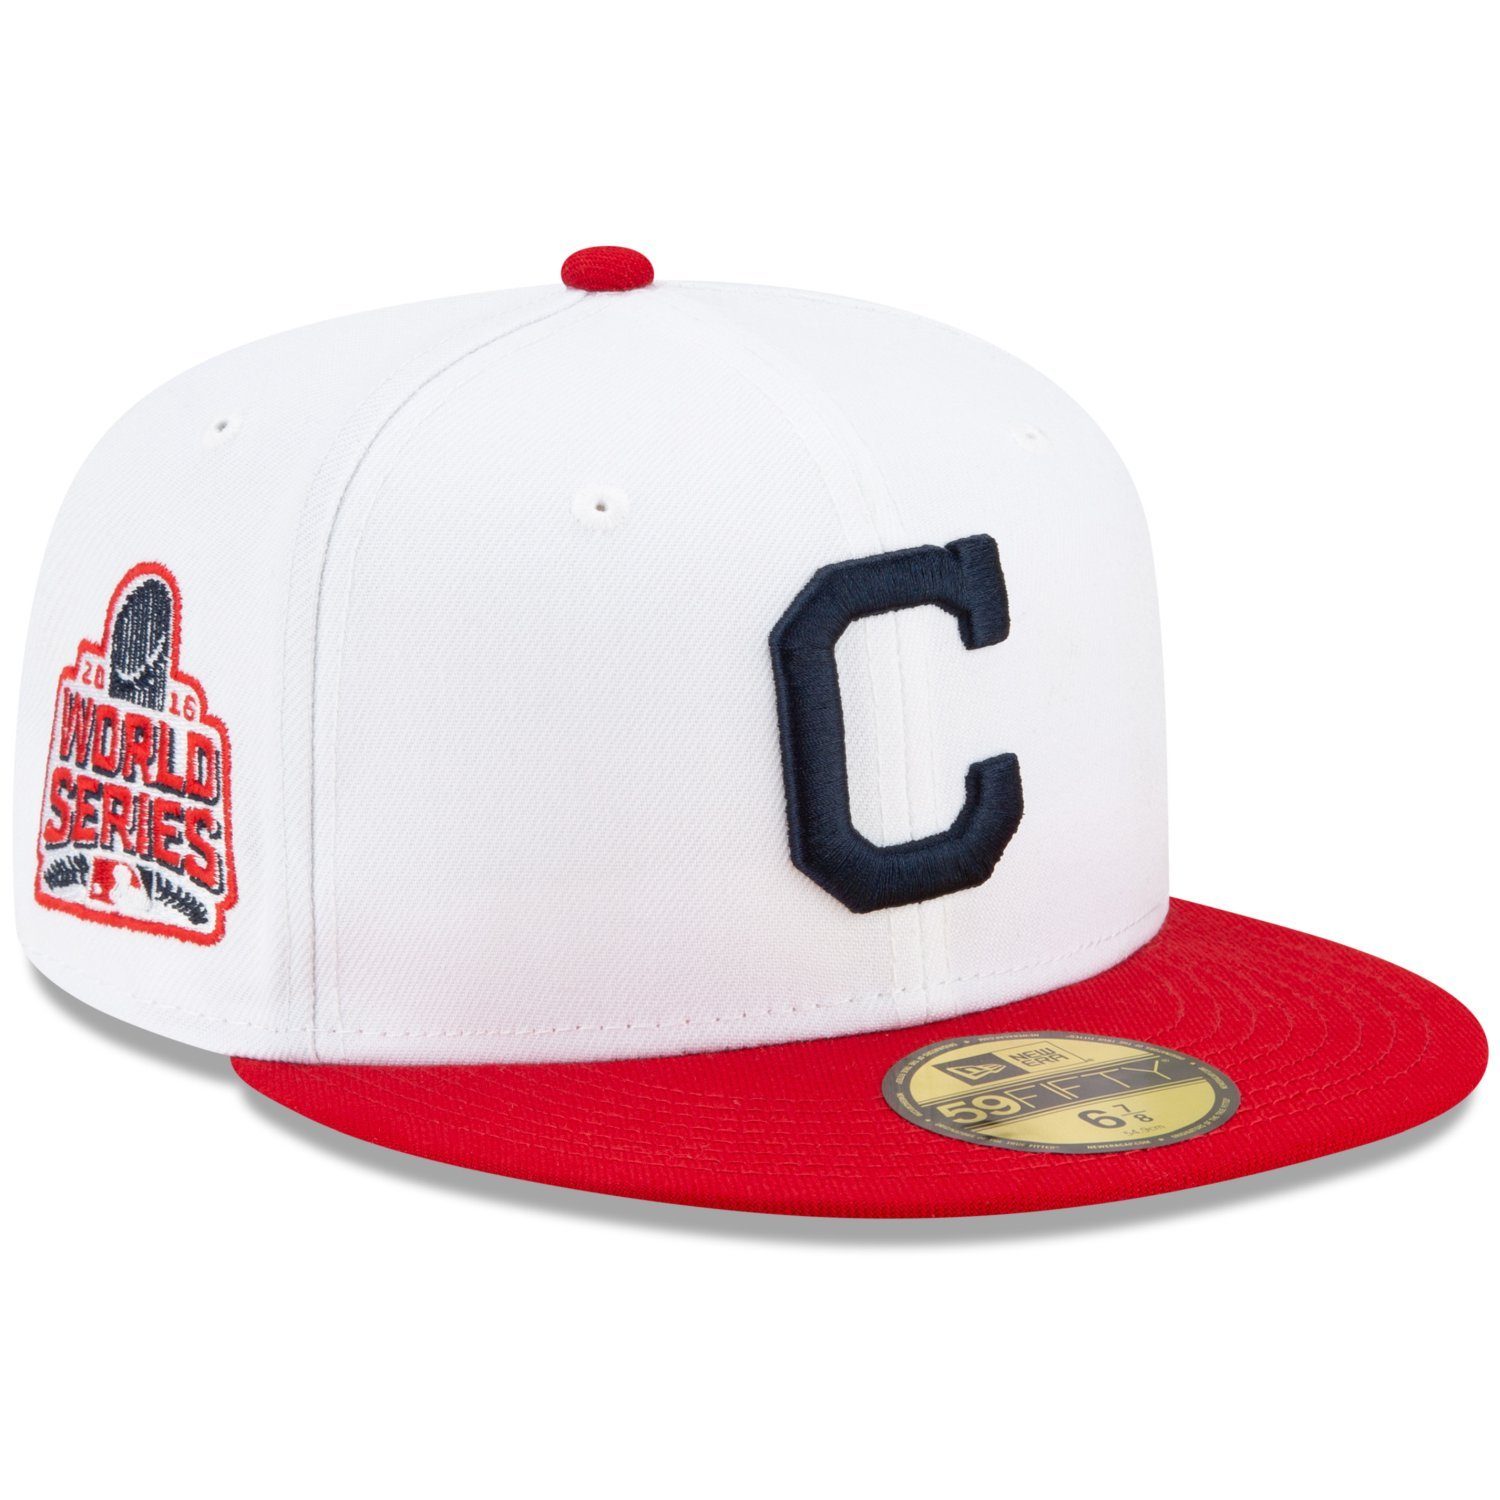 New Era Fitted Cap 59Fifty WORLD SERIES 2016 Cleveland Indians | Fitted Caps